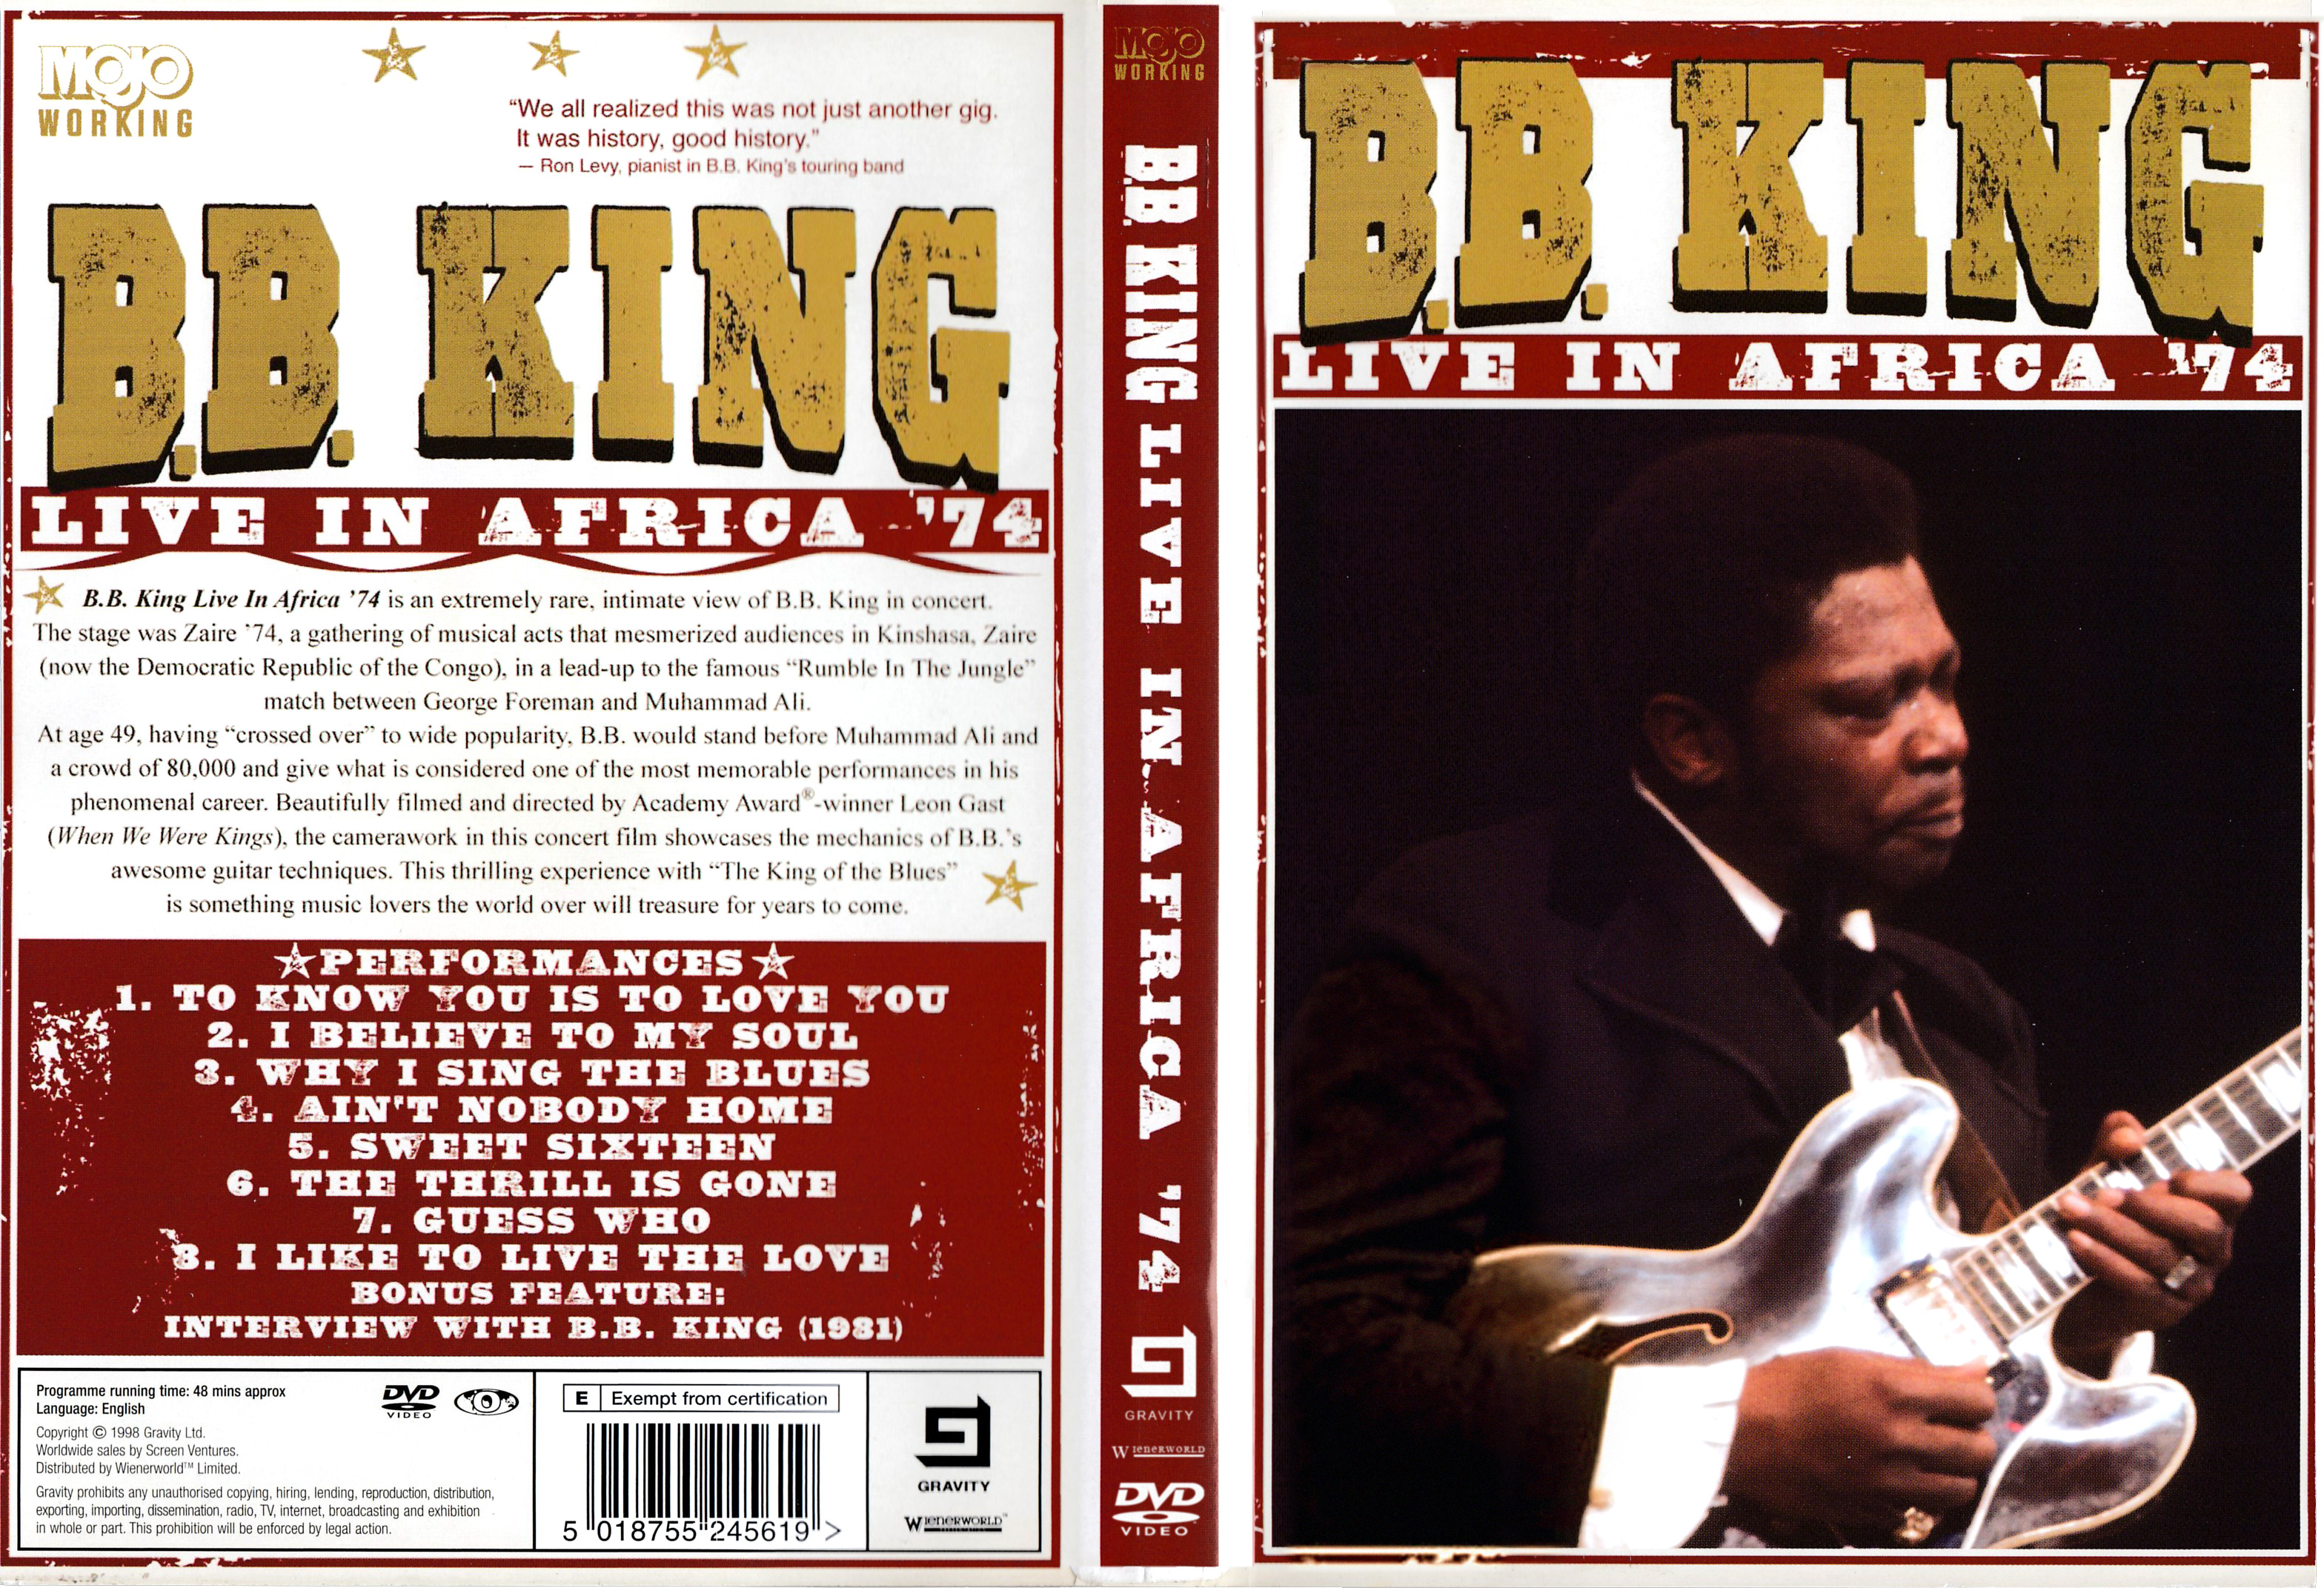 Jaquette DVD BB King Live in Africa 74